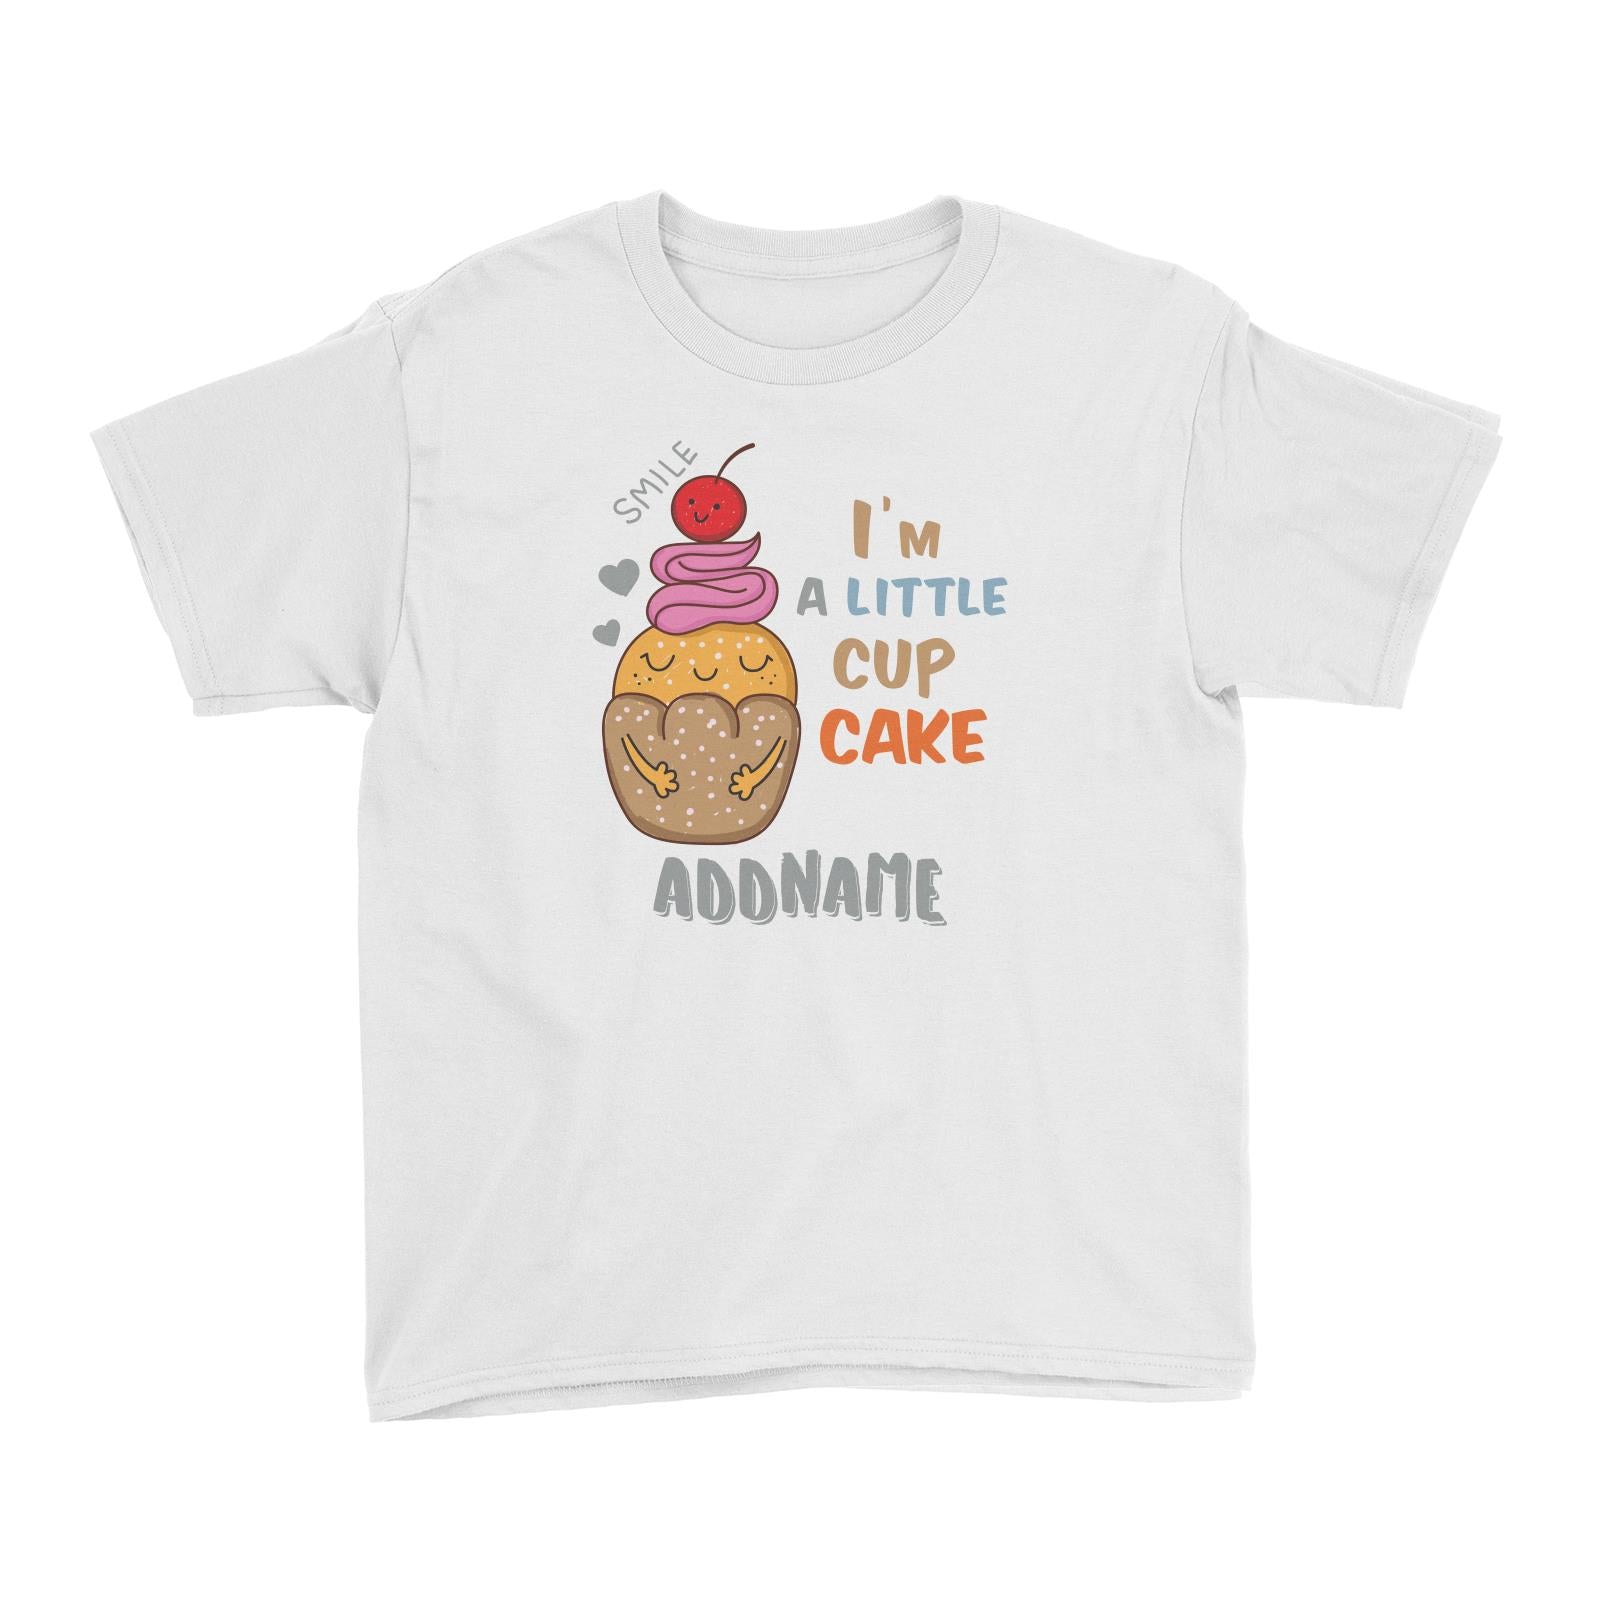 Cool Cute Foods I'm A Little Cup Cake Addname Kid's T-Shirt